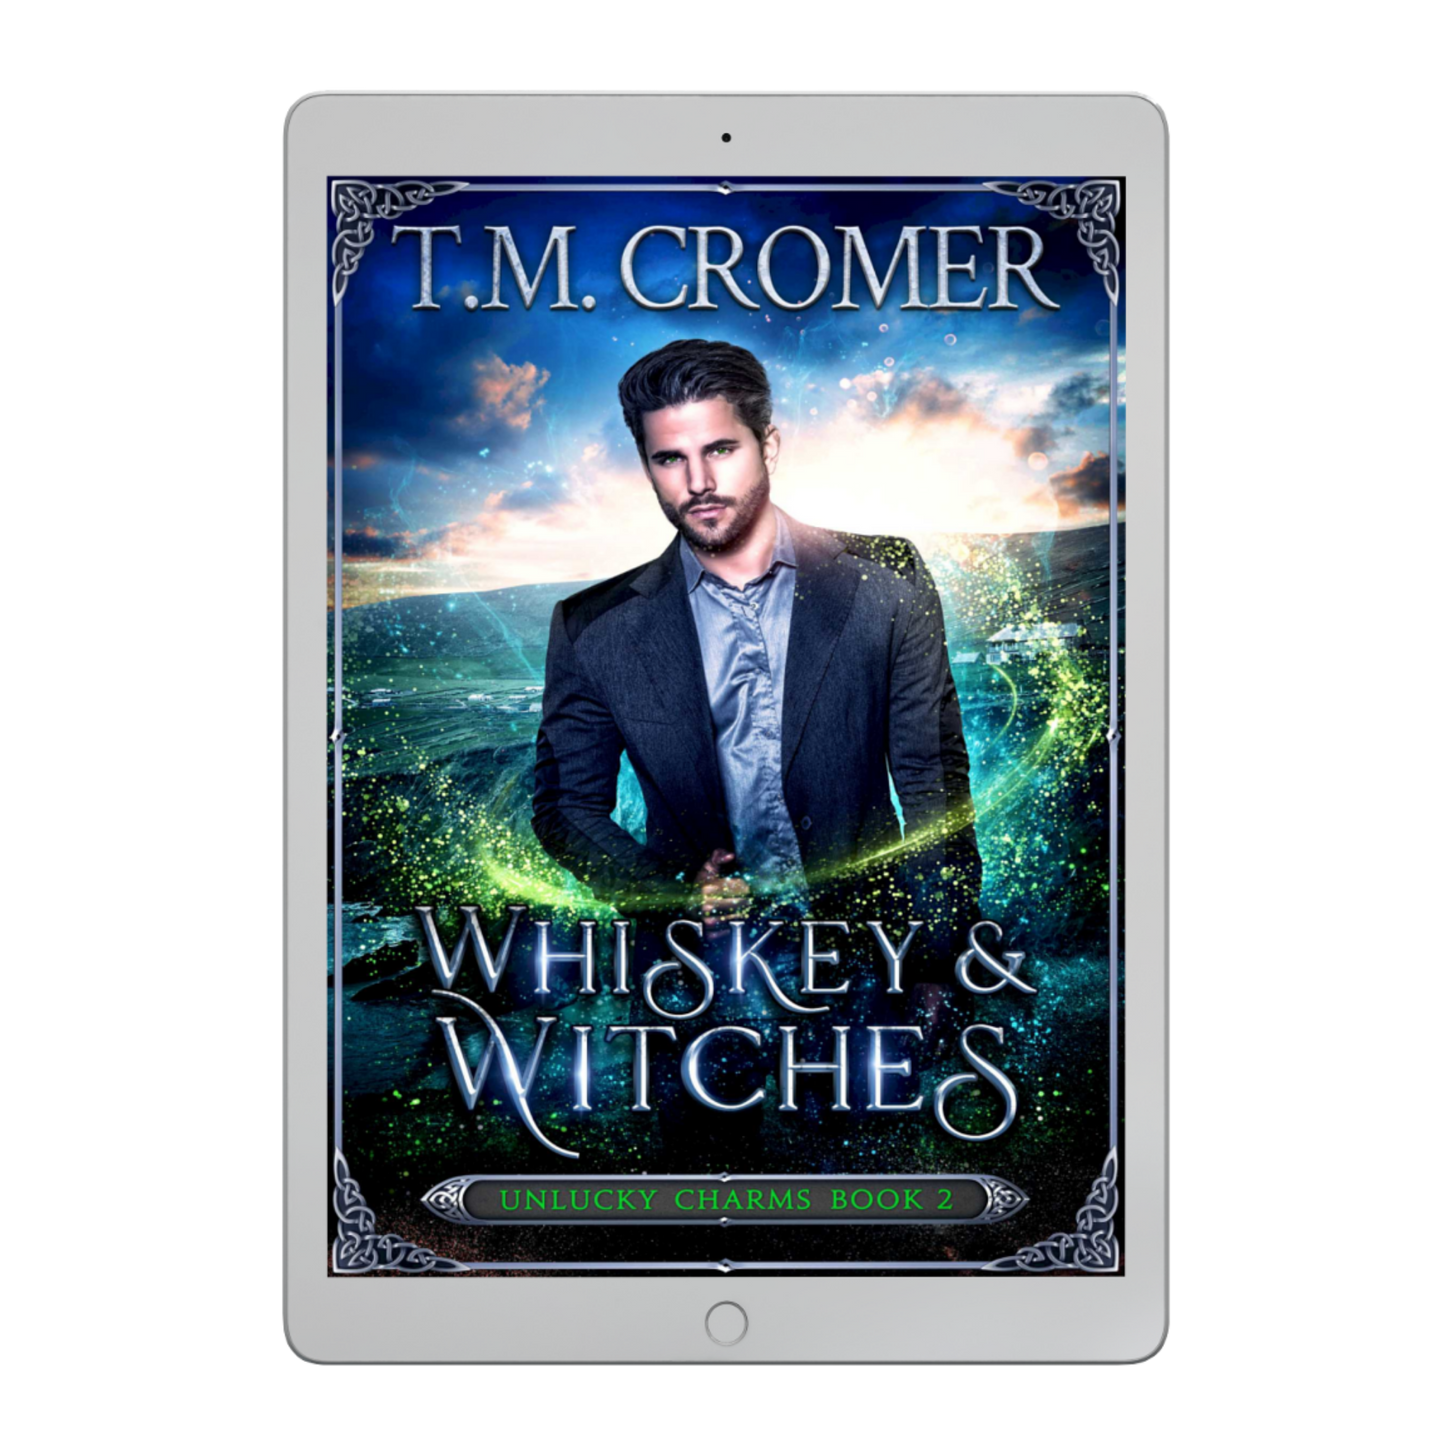 Whiskey and Witches Unlucky Charms #2 Ebook Paranormal Romance Urban Fantasy Magical Realism Irish Adventure Witches and Warlocks